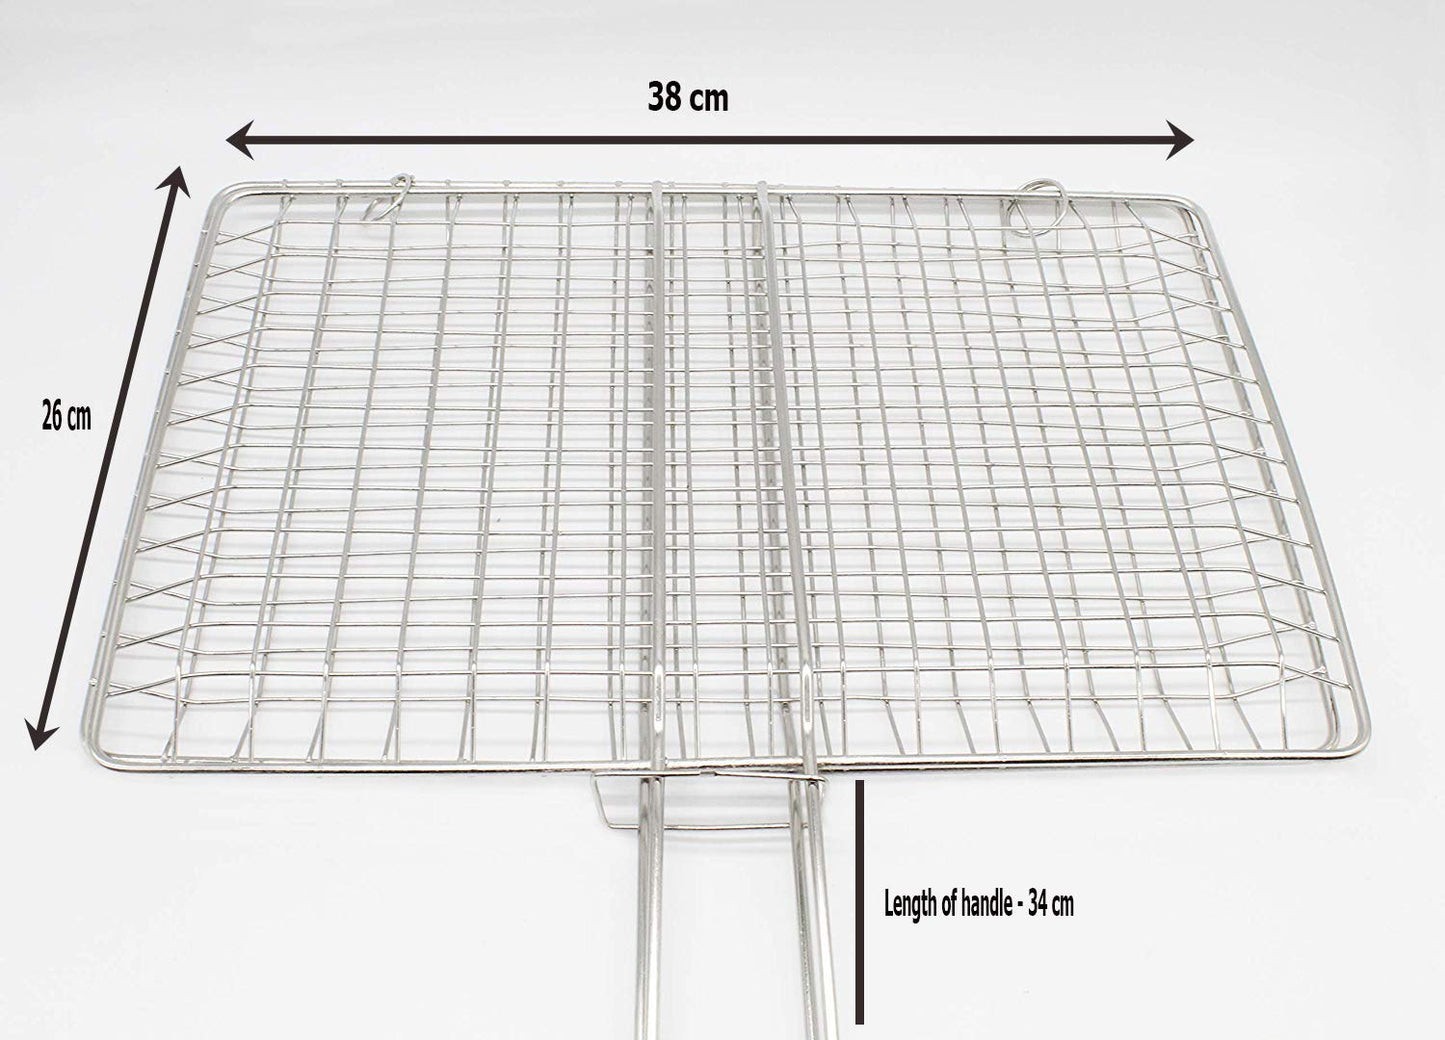 Stainless Steel Foladable Portable Barbecue BBQ Grill Net Basket for Fish, Meat, Vegetable, Steak and Shrimp